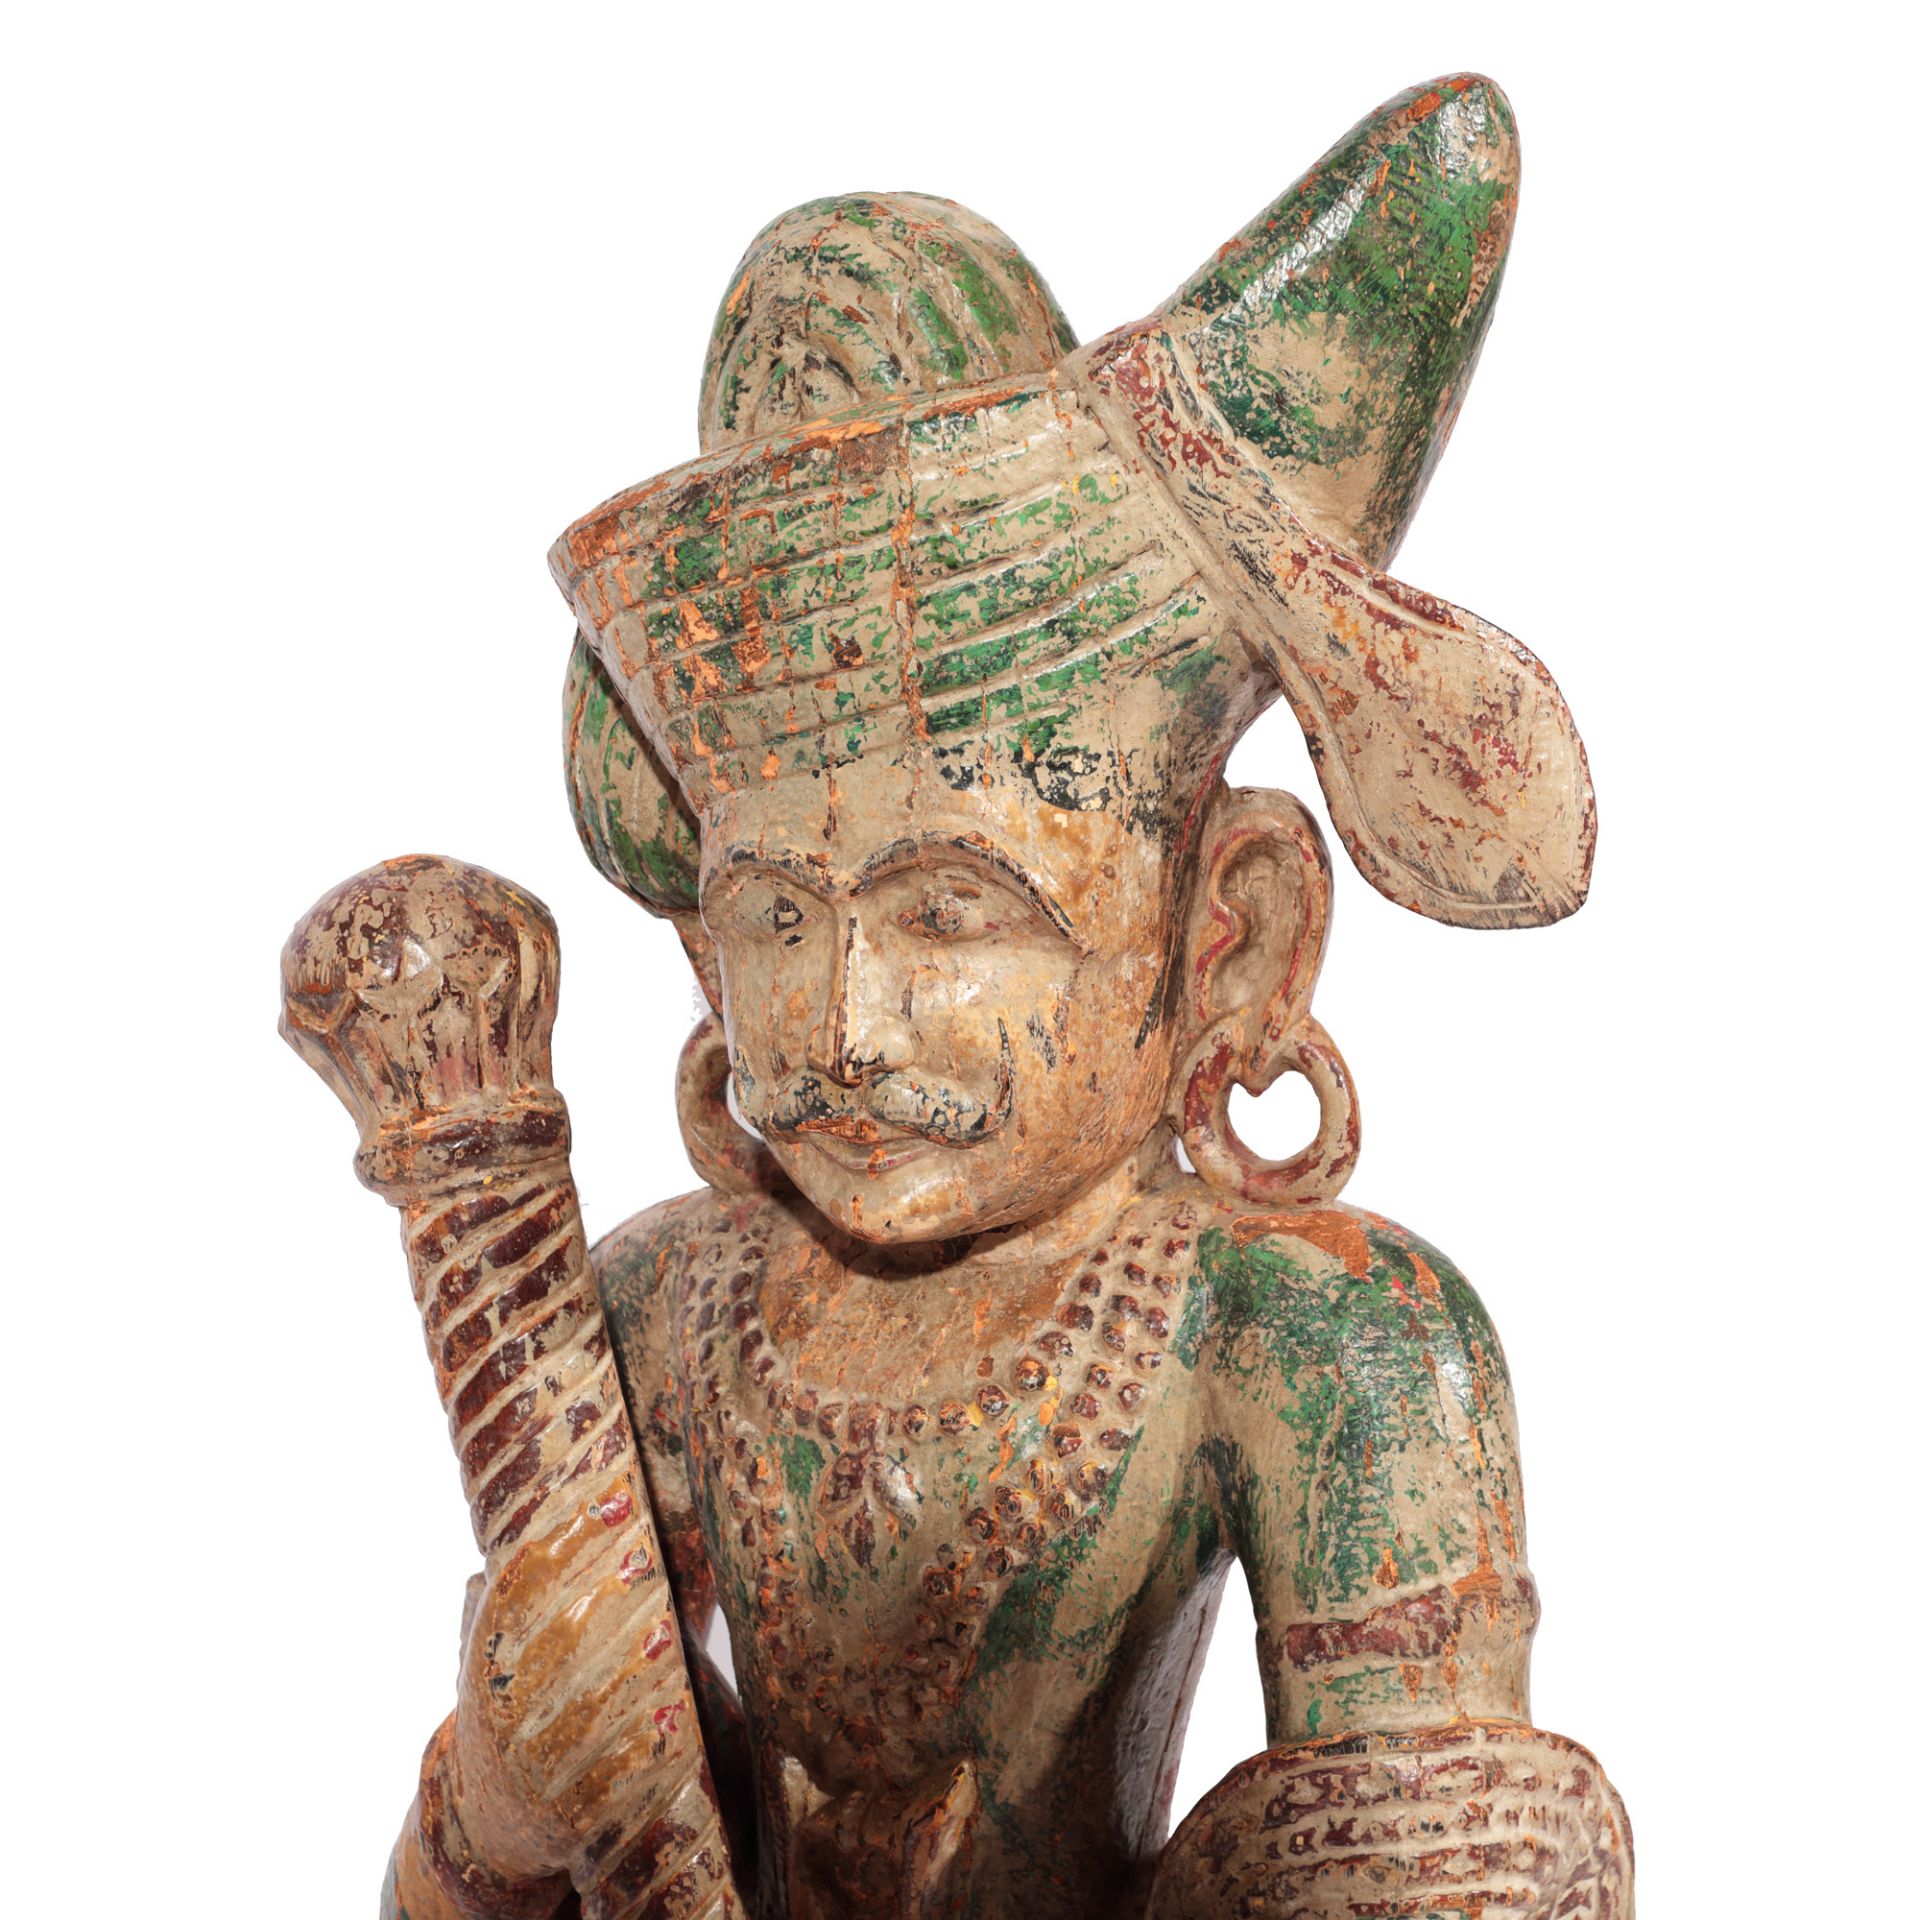 Indo-Persian statuette, painted wood, depicting a fighter, possibly early 19th century - Image 3 of 4